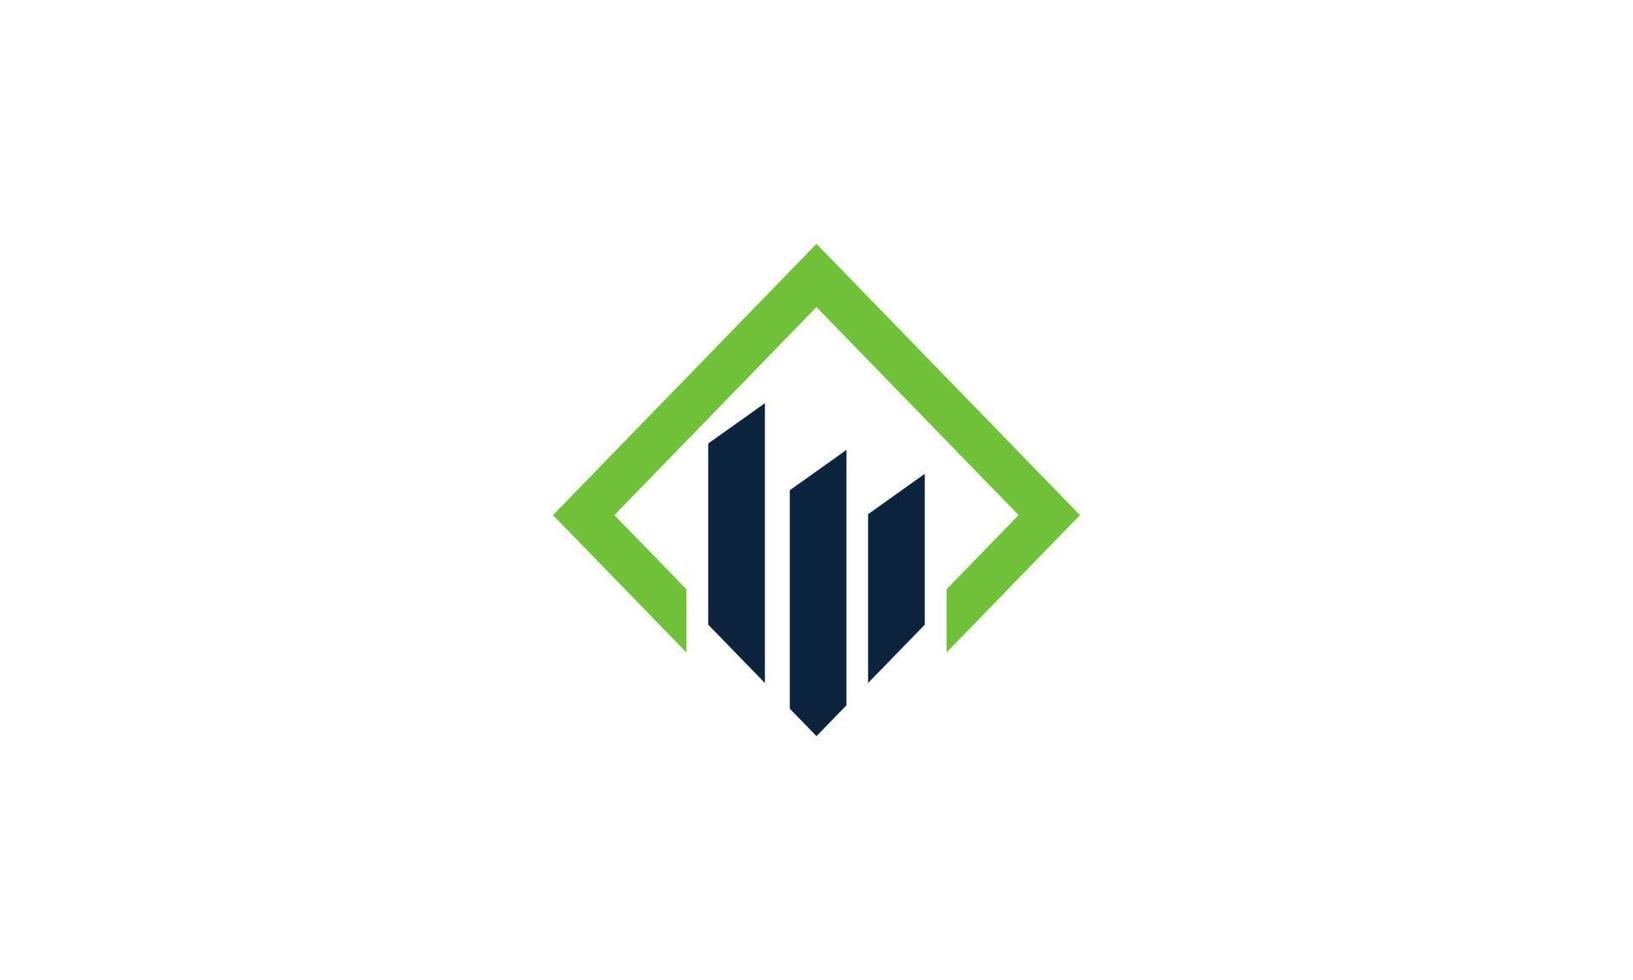 abstract creative abstract finance symbol logo design template with navy and green color logo icon vector isolated